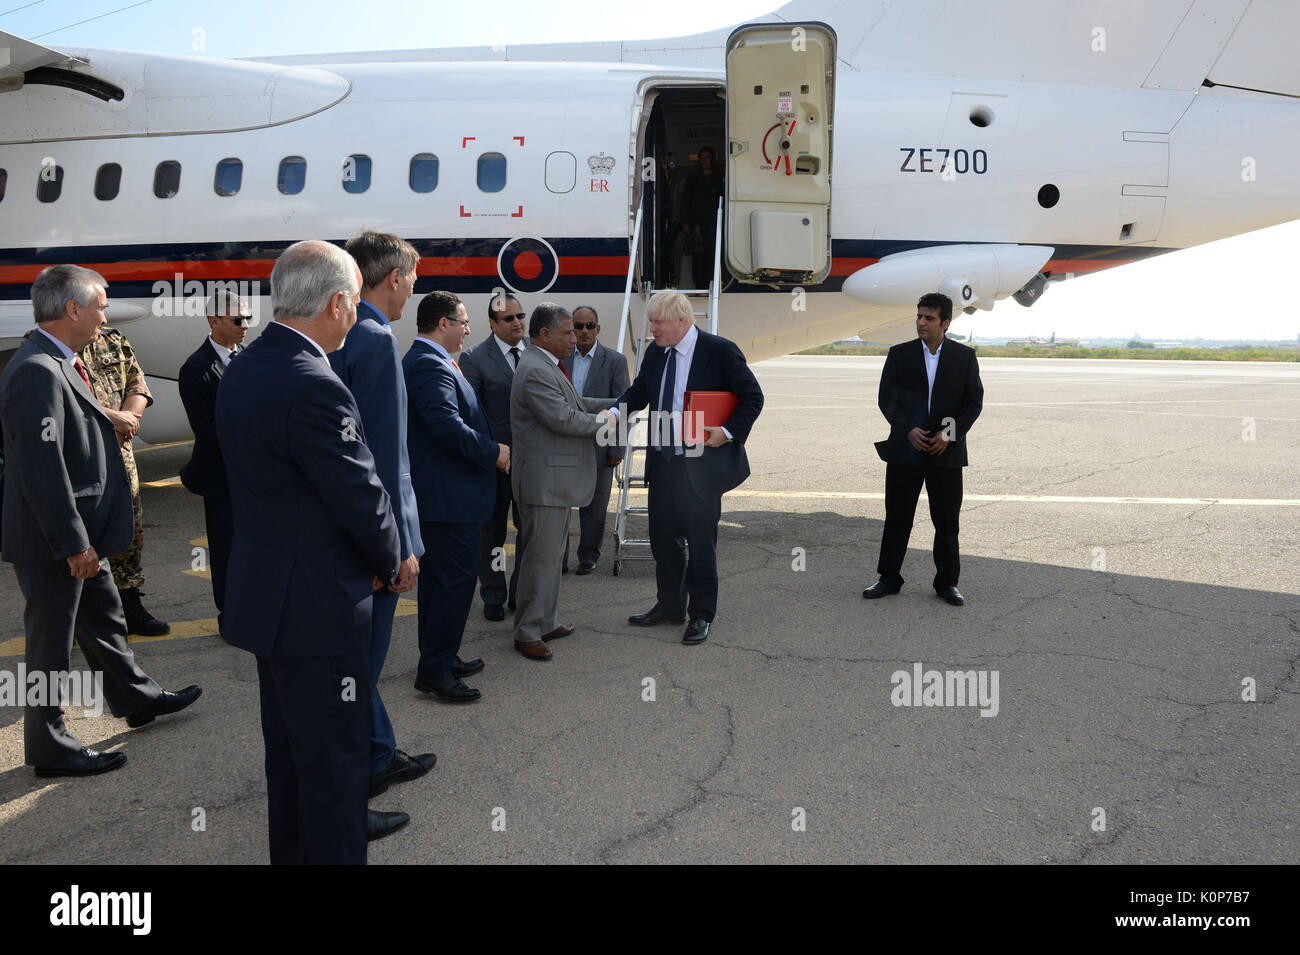 Foreign Secretary Boris Johnson greets dignitaries at the airport in Tripoli, Libya, during his visit to the country. Stock Photo